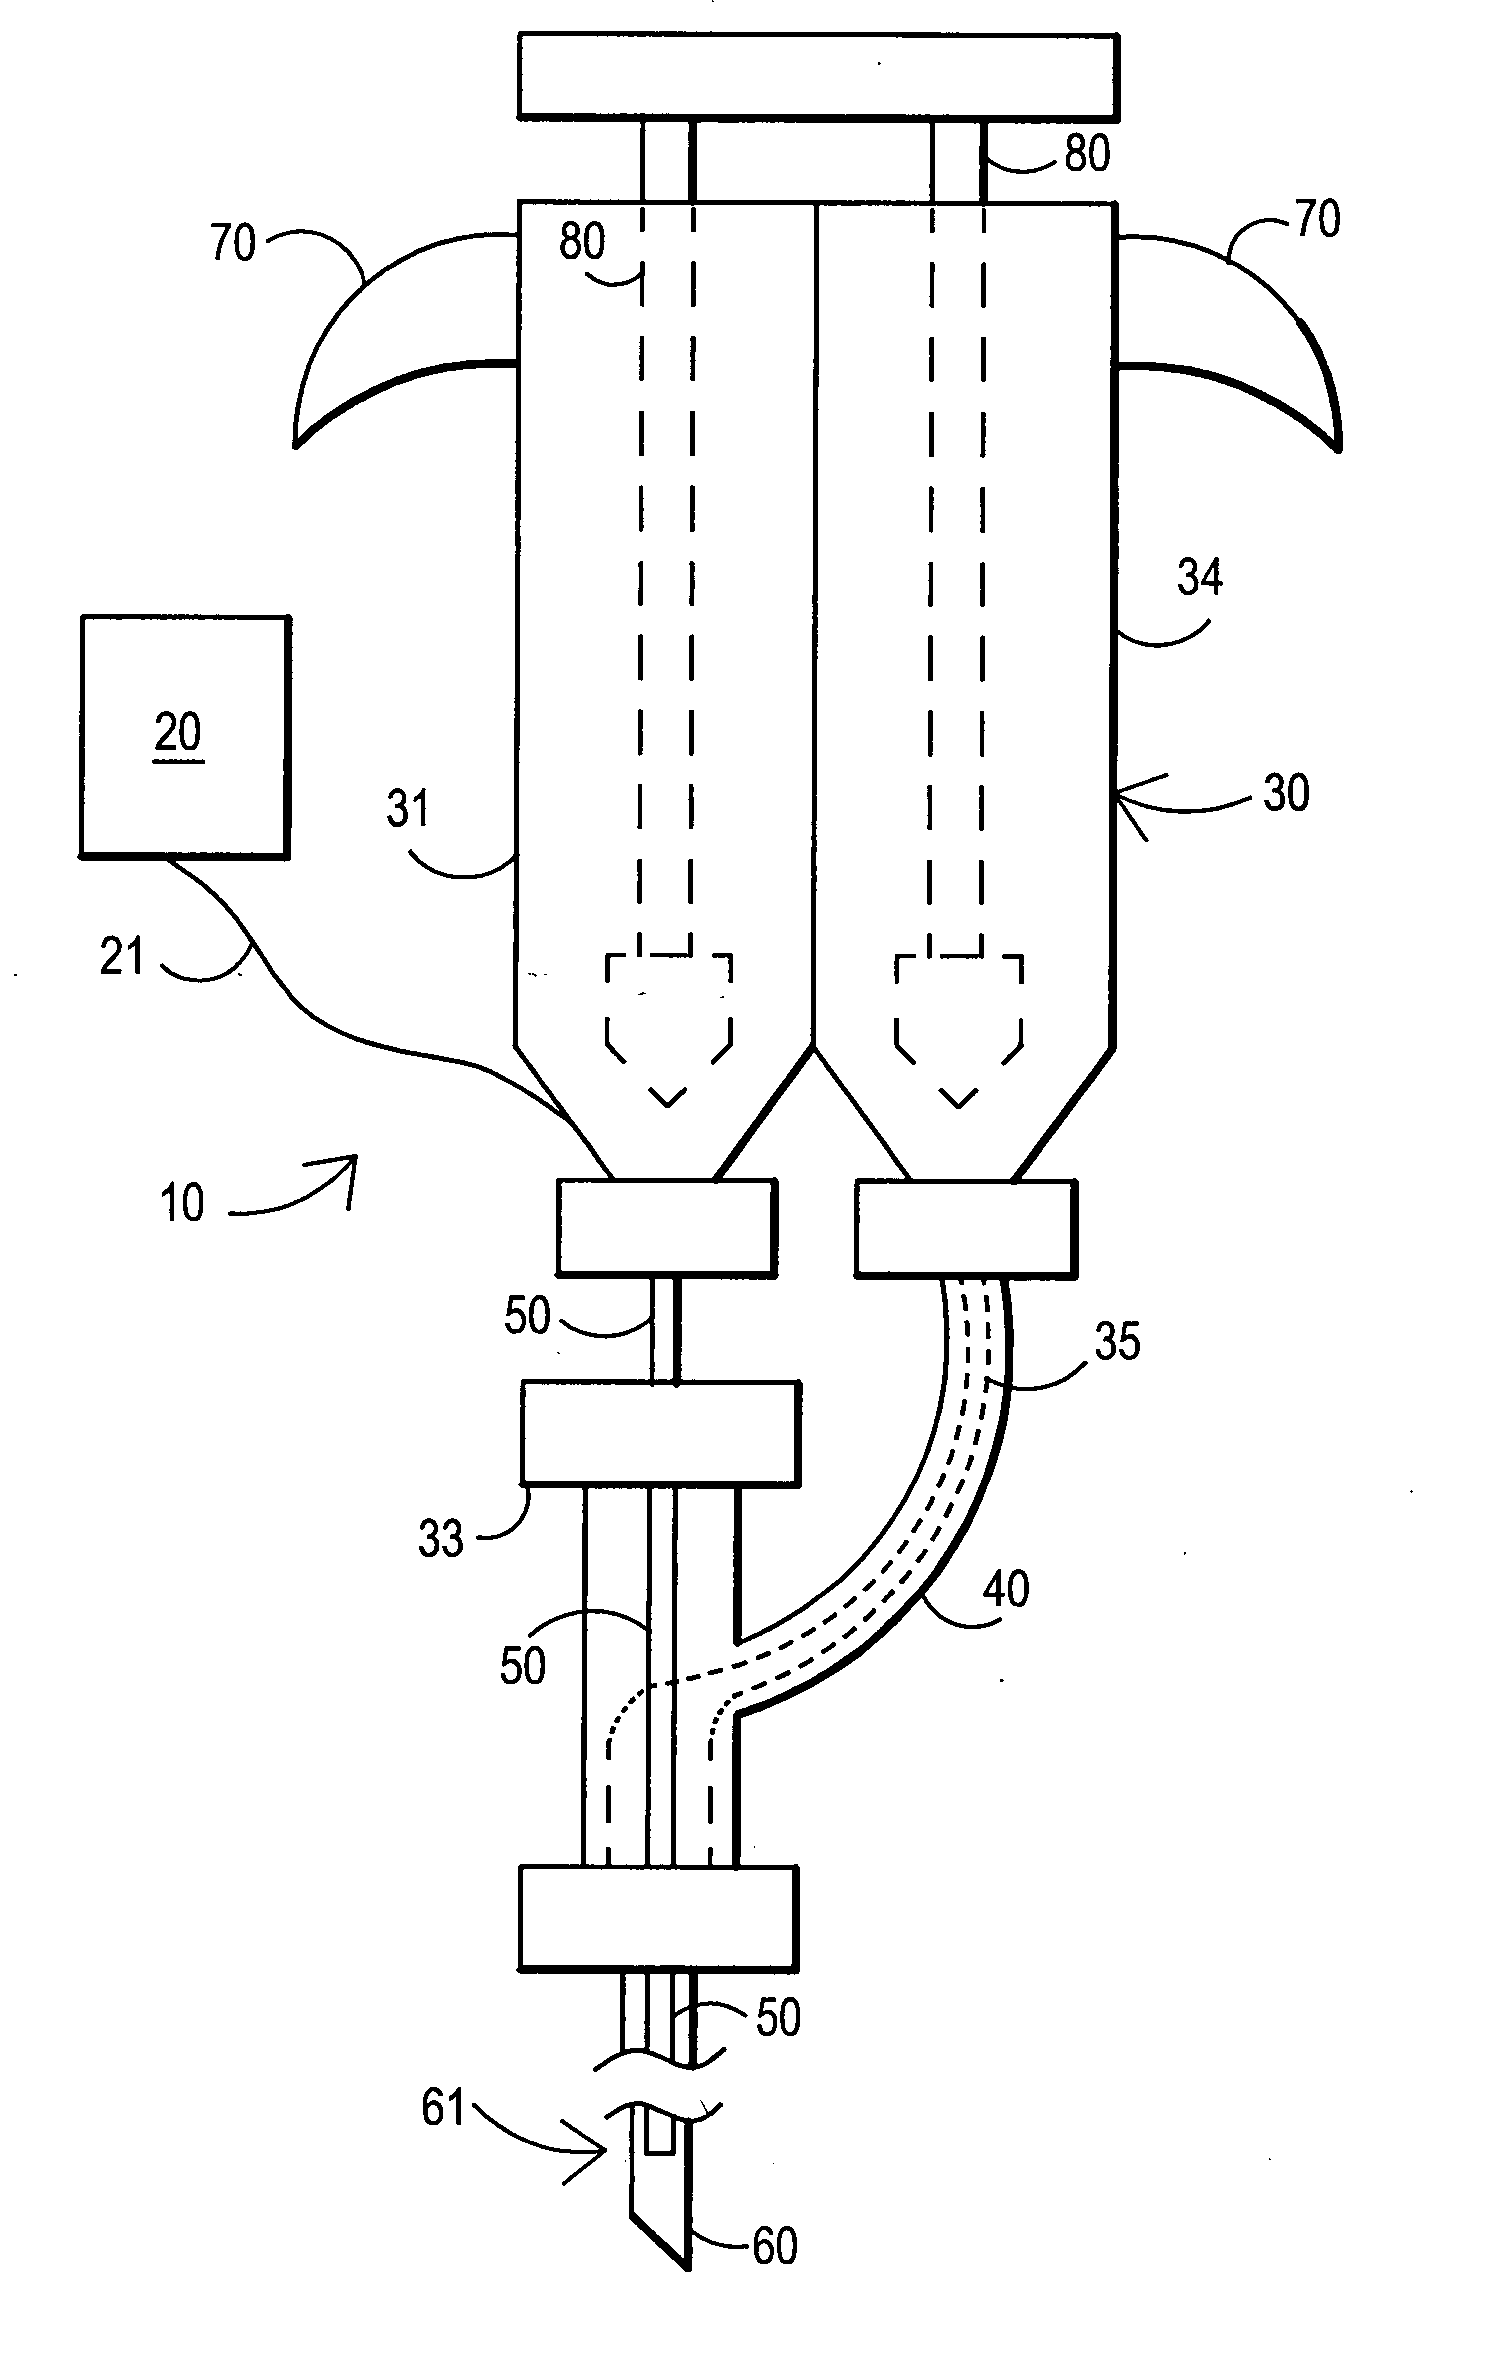 Apparatus and method for injection of fibrin sealant in spinal applications